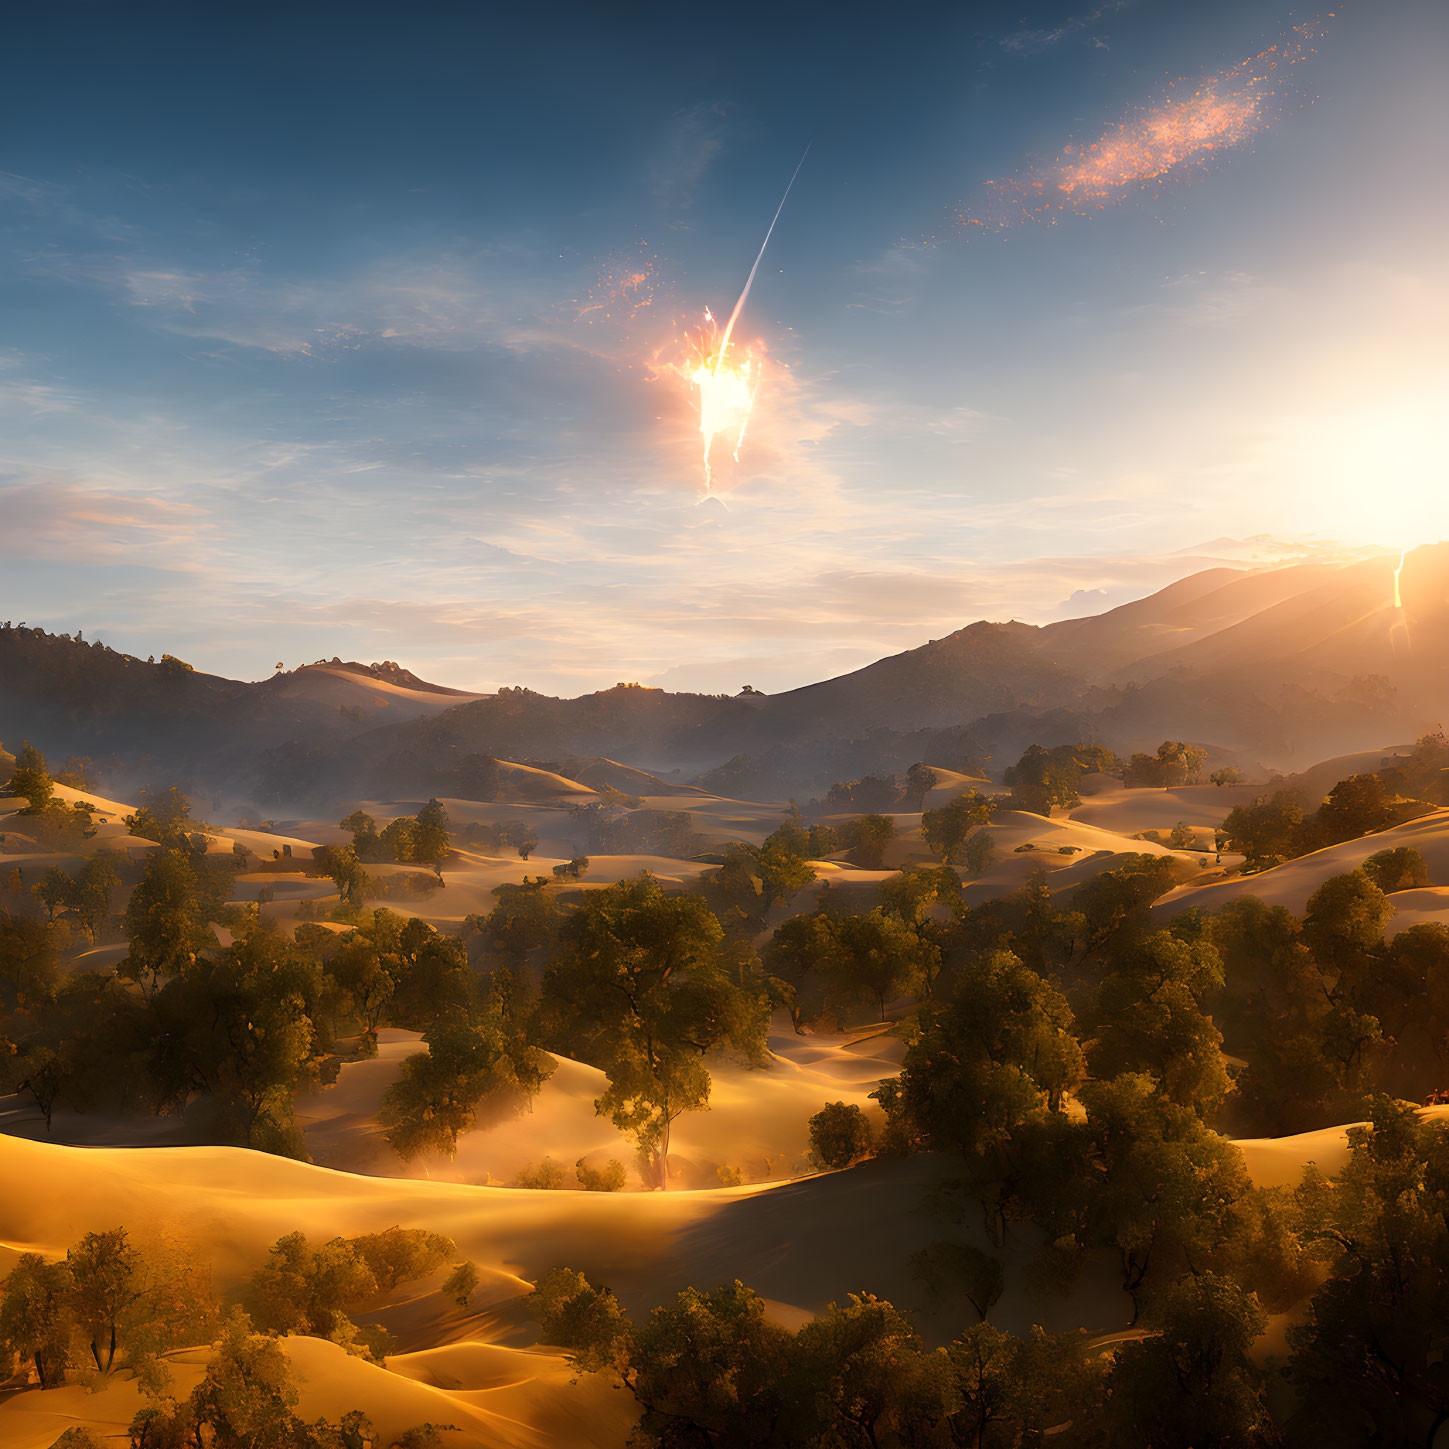 Golden sunrise over rolling sand dunes with shooting star in the sky